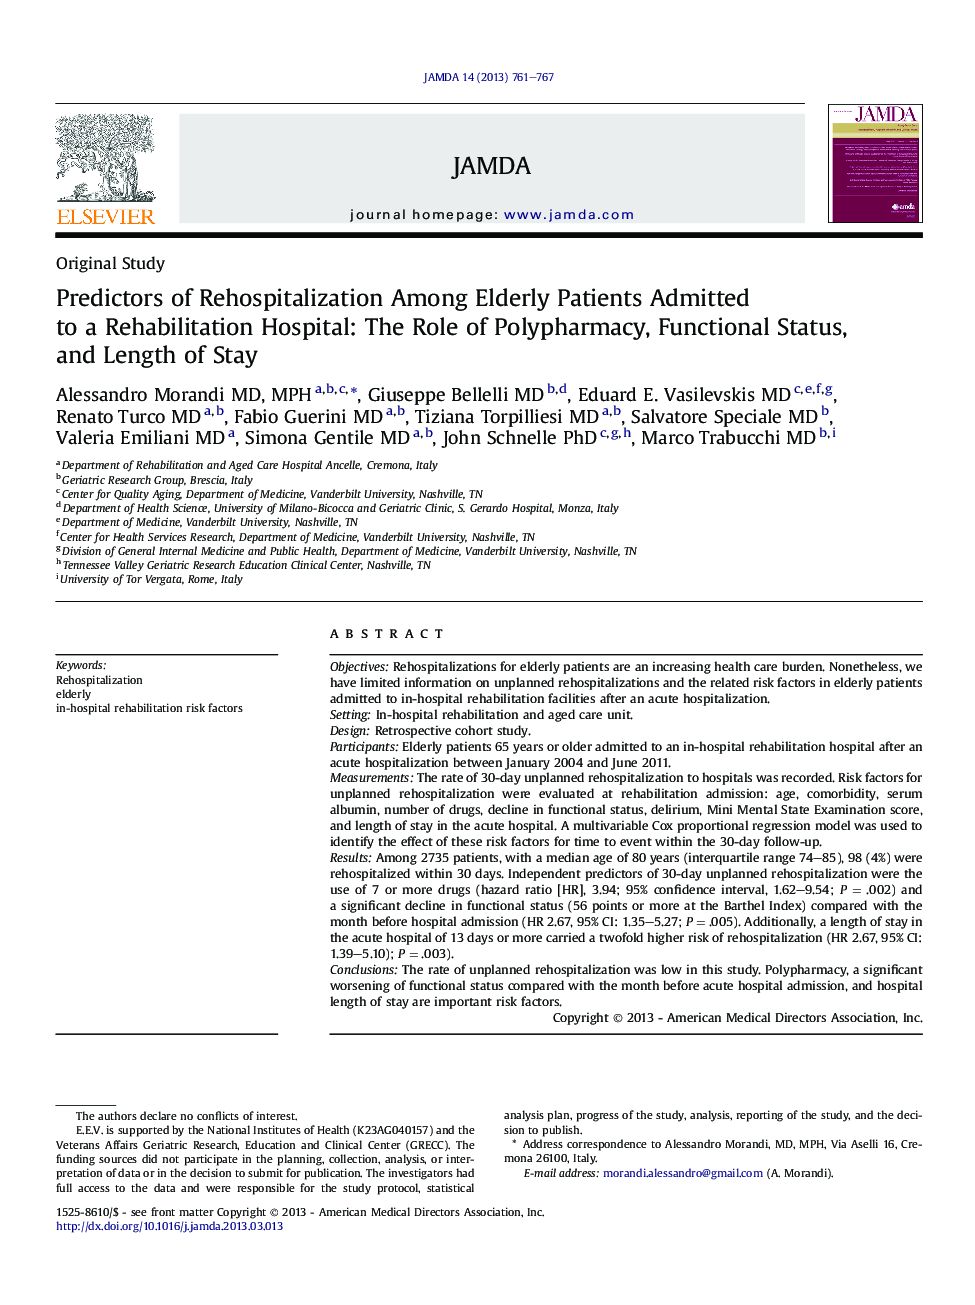 Predictors of Rehospitalization Among Elderly Patients Admitted to a Rehabilitation Hospital: The Role of Polypharmacy, Functional Status, and Length of Stay